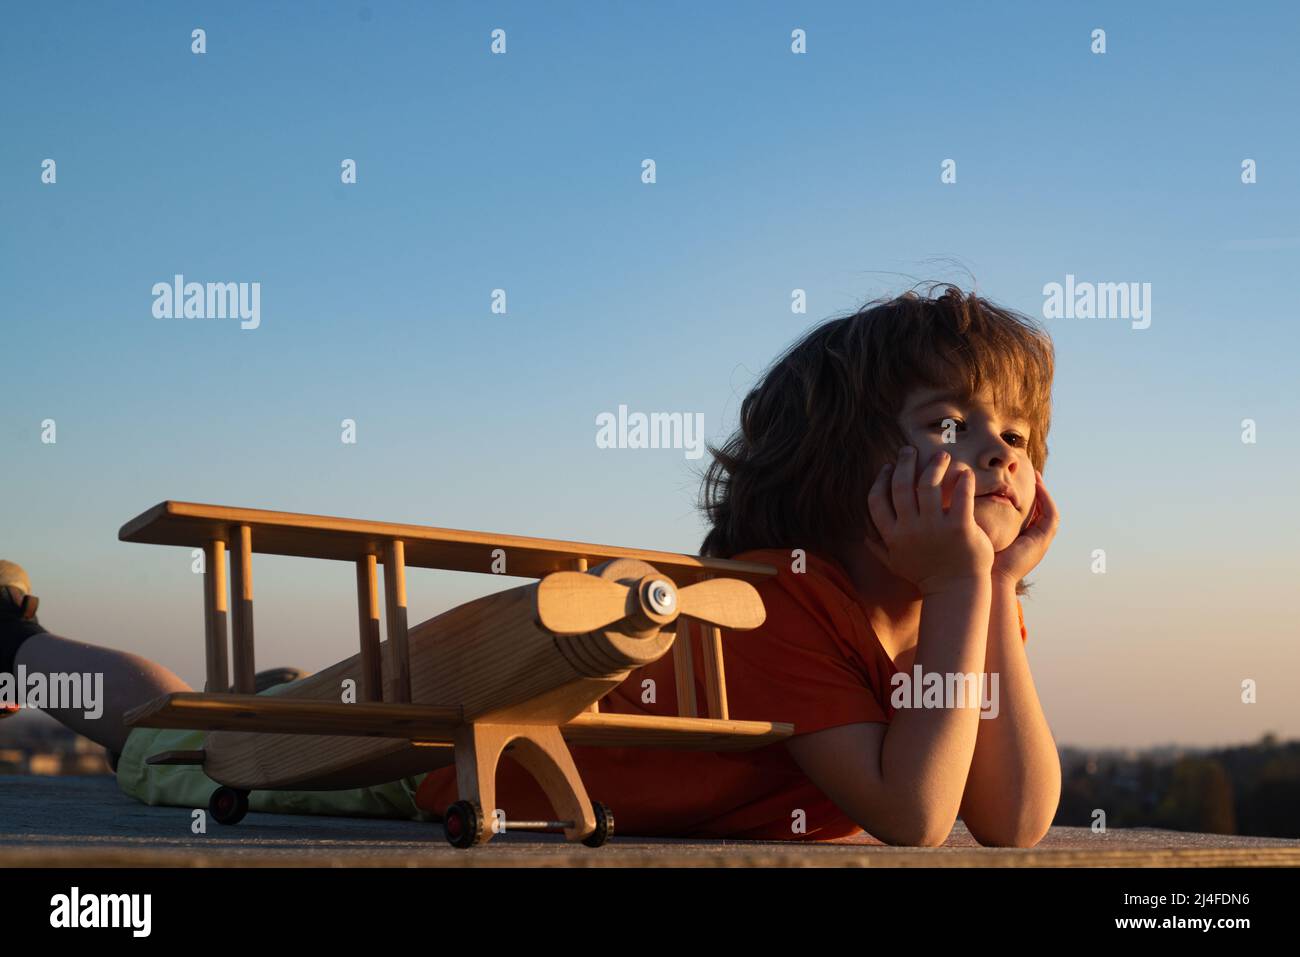 Little boy 7 year old with wooden plane, boy wants to become pilot and astronaut. Happy child play with toy airplane. Kids pilot dreams of flying. Stock Photo